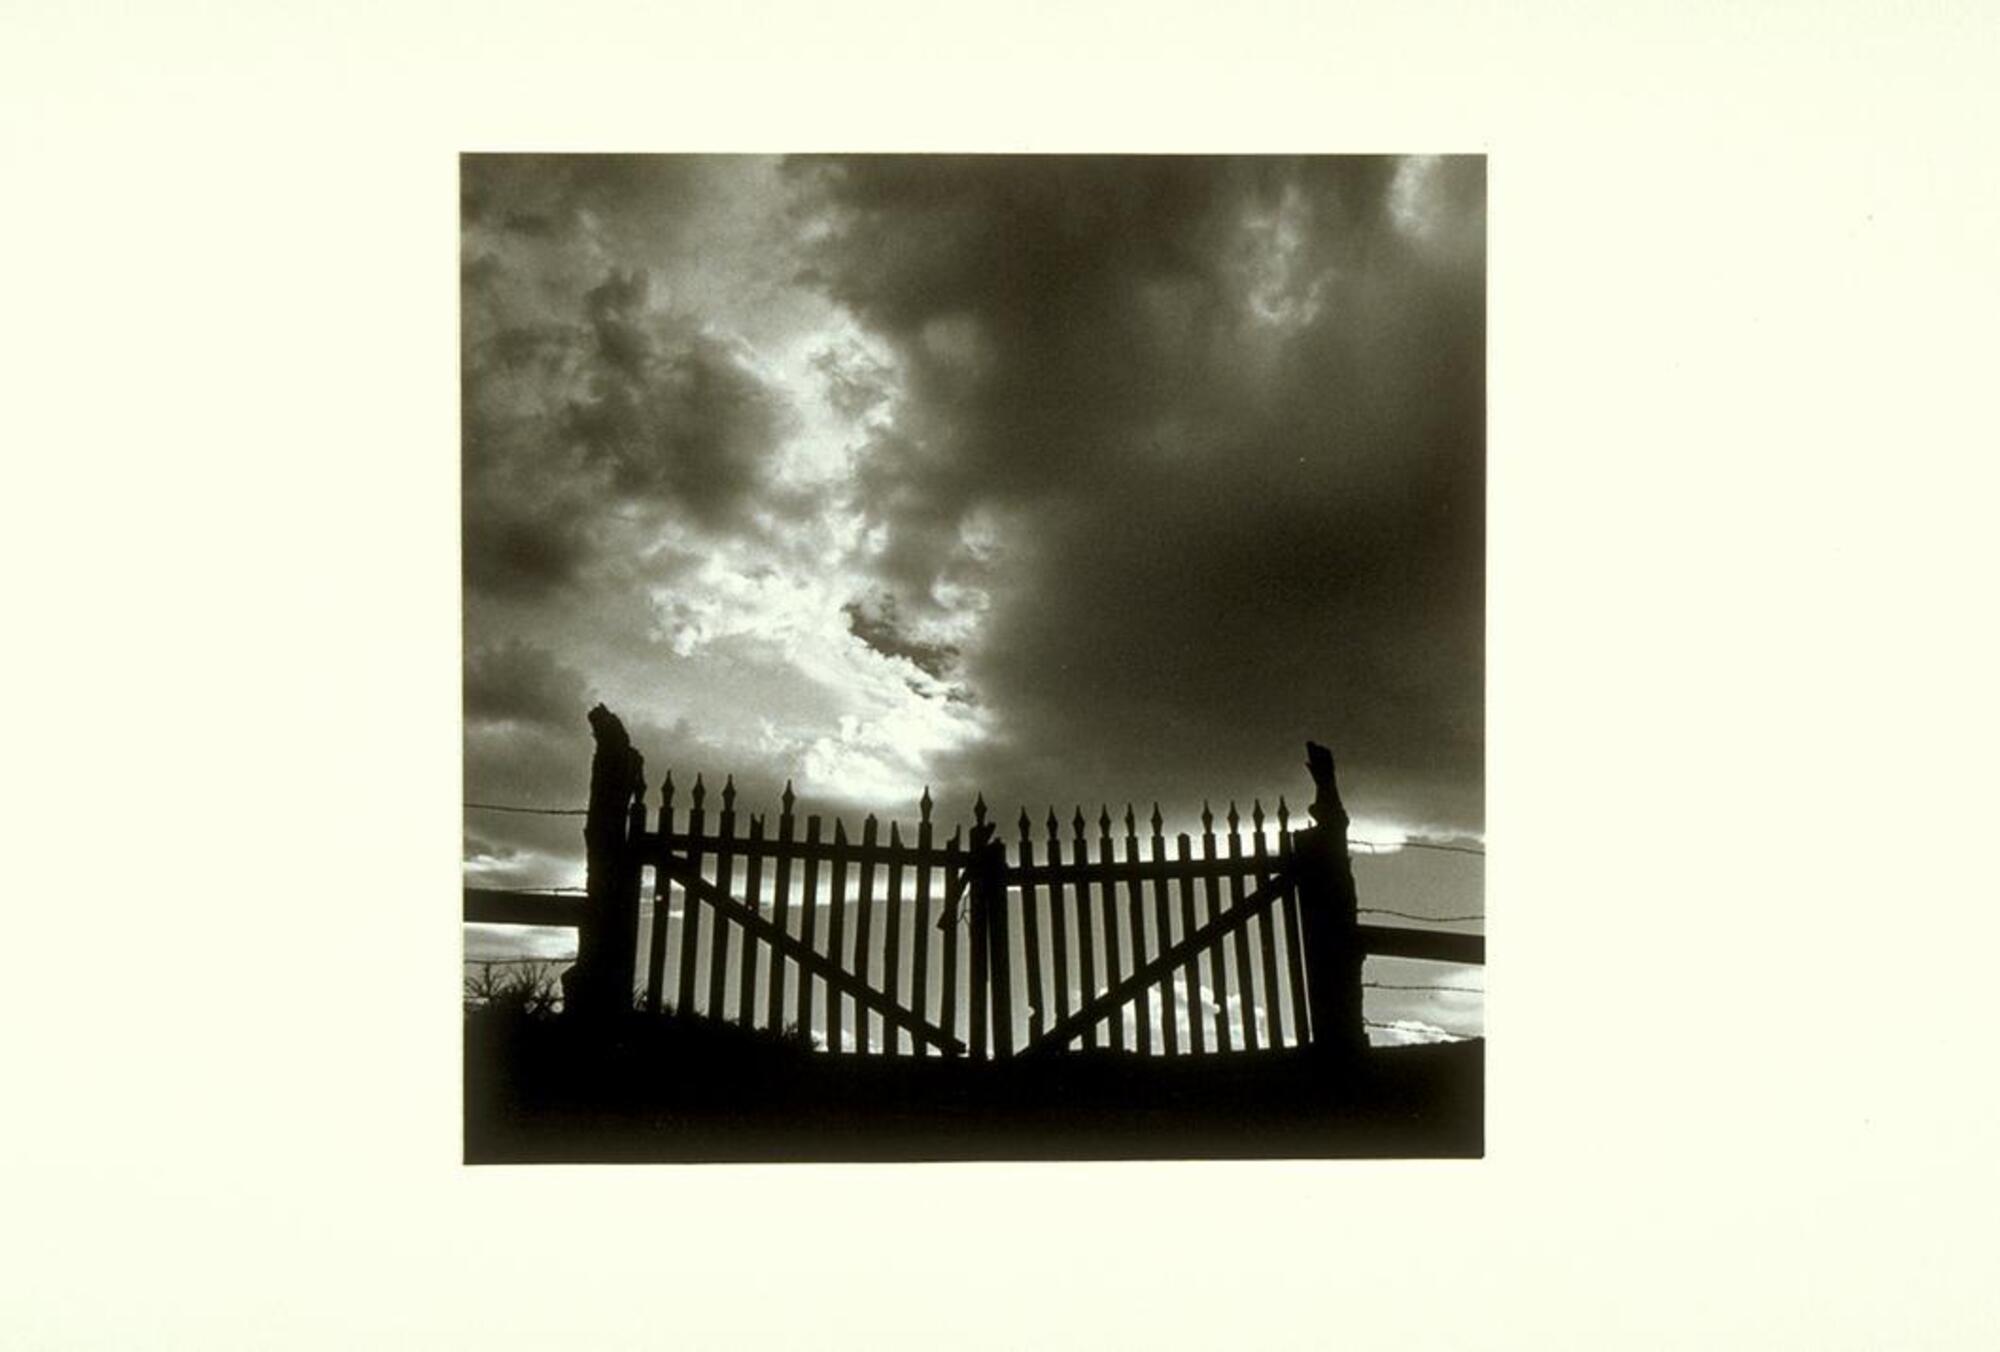 A photograph of a pair of gates set against a cloudy sky.